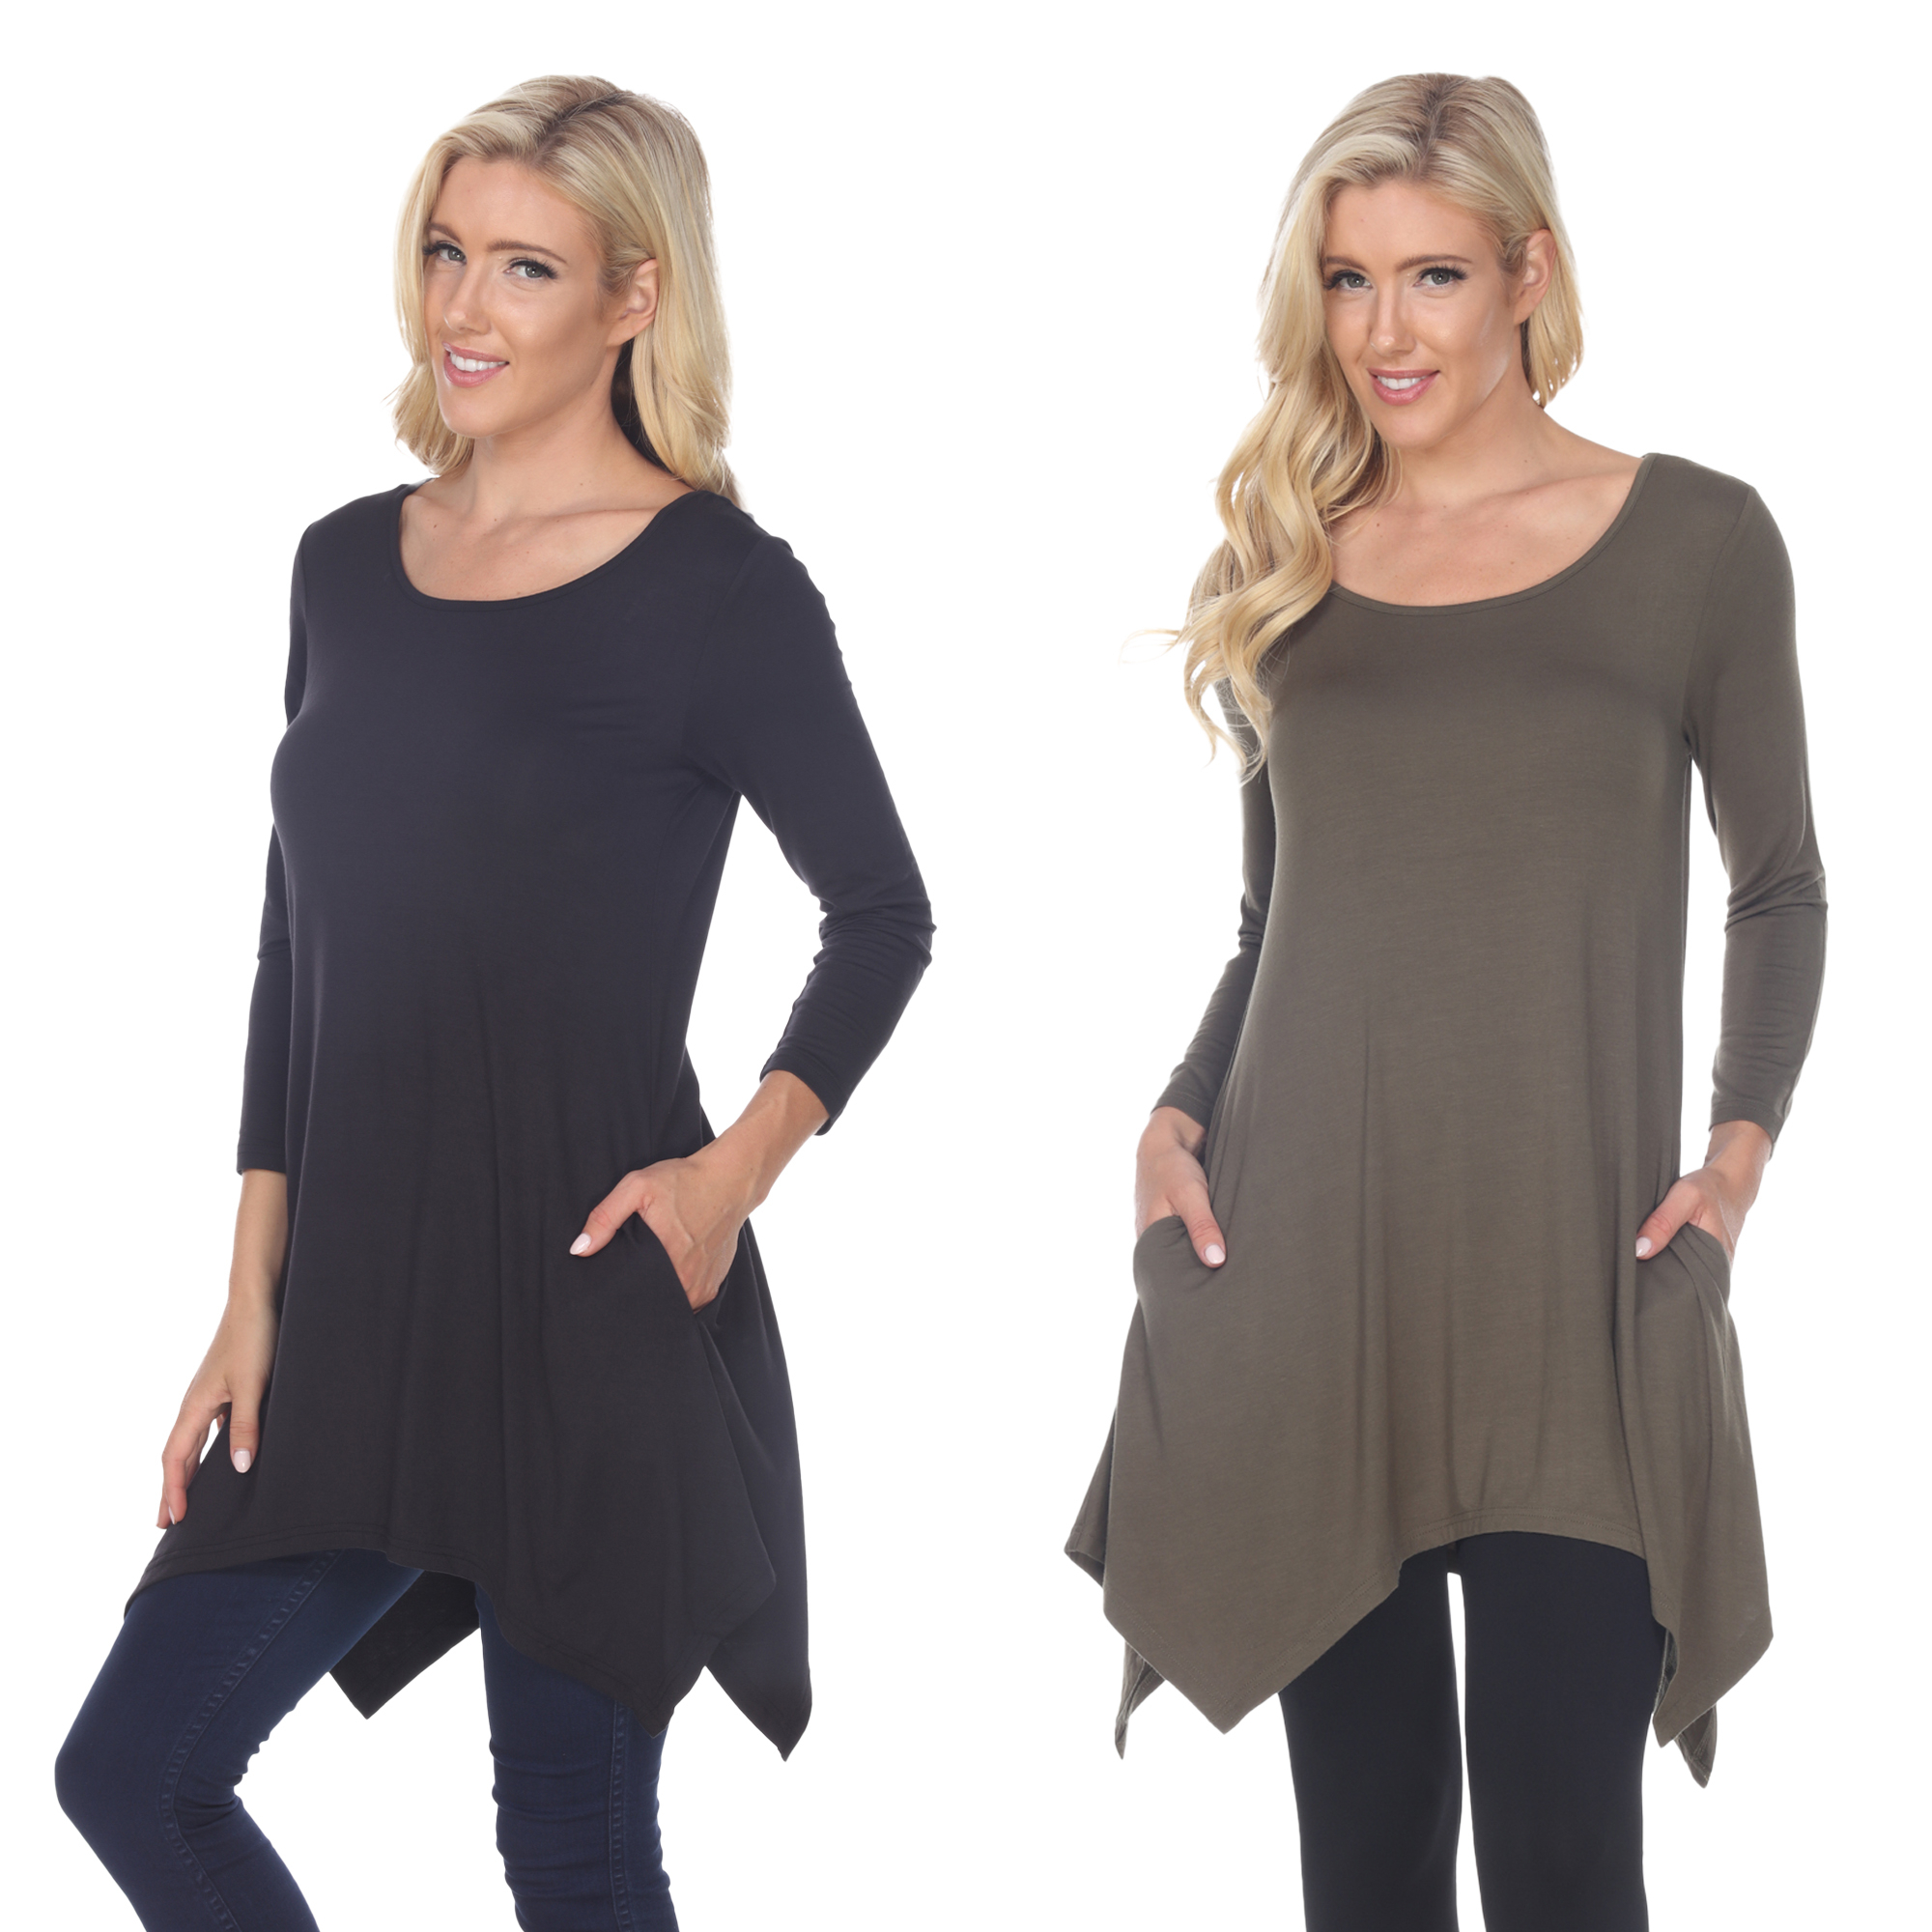 White Mark Women's Pack Of 2 Black Tunic Top - Black, Olive, Small